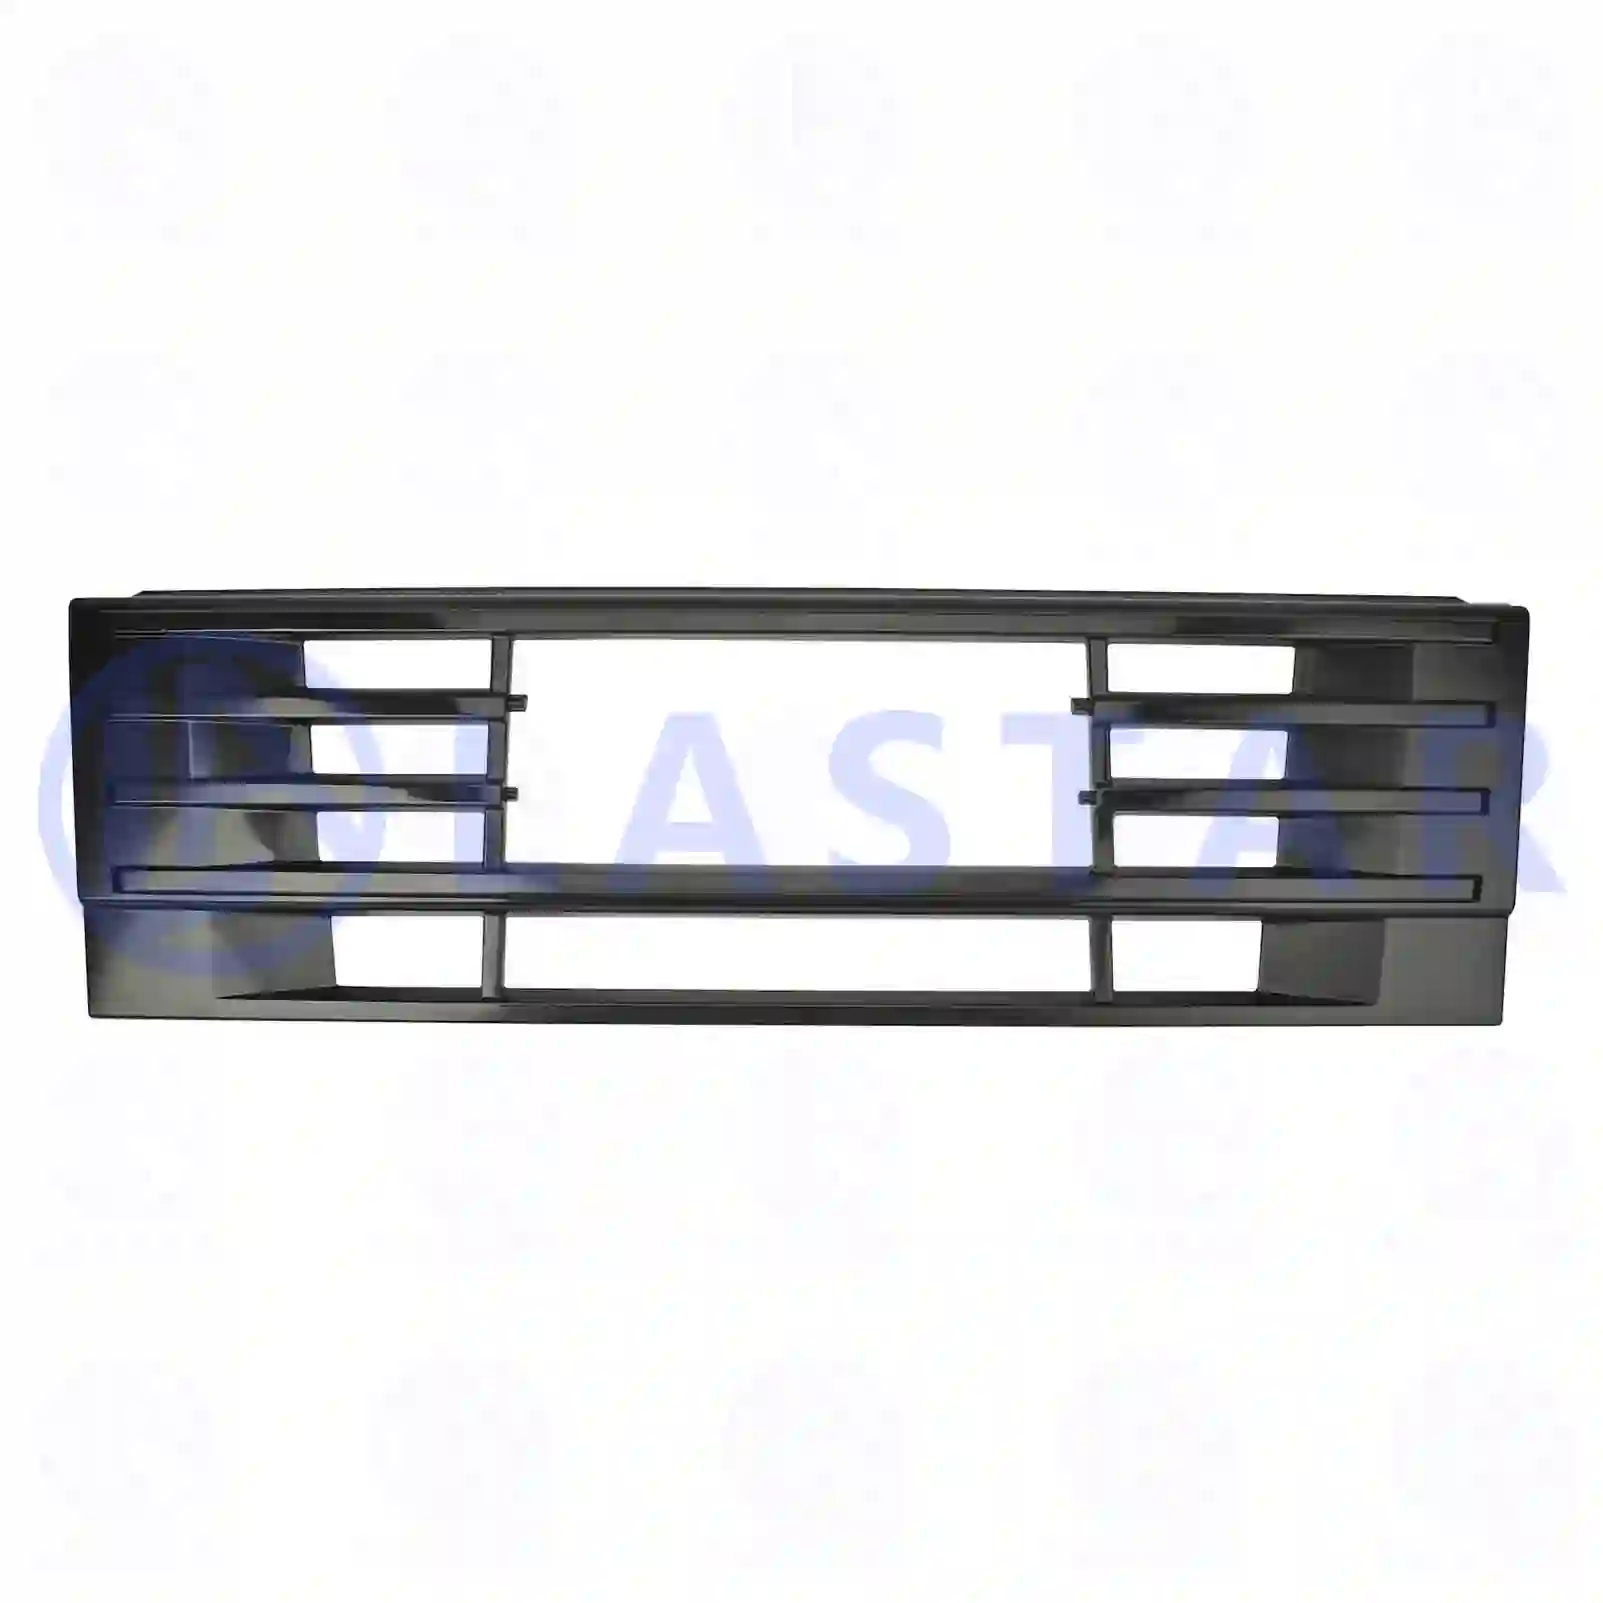 Front grill, lower, 77721004, 1063509, 8144482, ZG60808-0008 ||  77721004 Lastar Spare Part | Truck Spare Parts, Auotomotive Spare Parts Front grill, lower, 77721004, 1063509, 8144482, ZG60808-0008 ||  77721004 Lastar Spare Part | Truck Spare Parts, Auotomotive Spare Parts